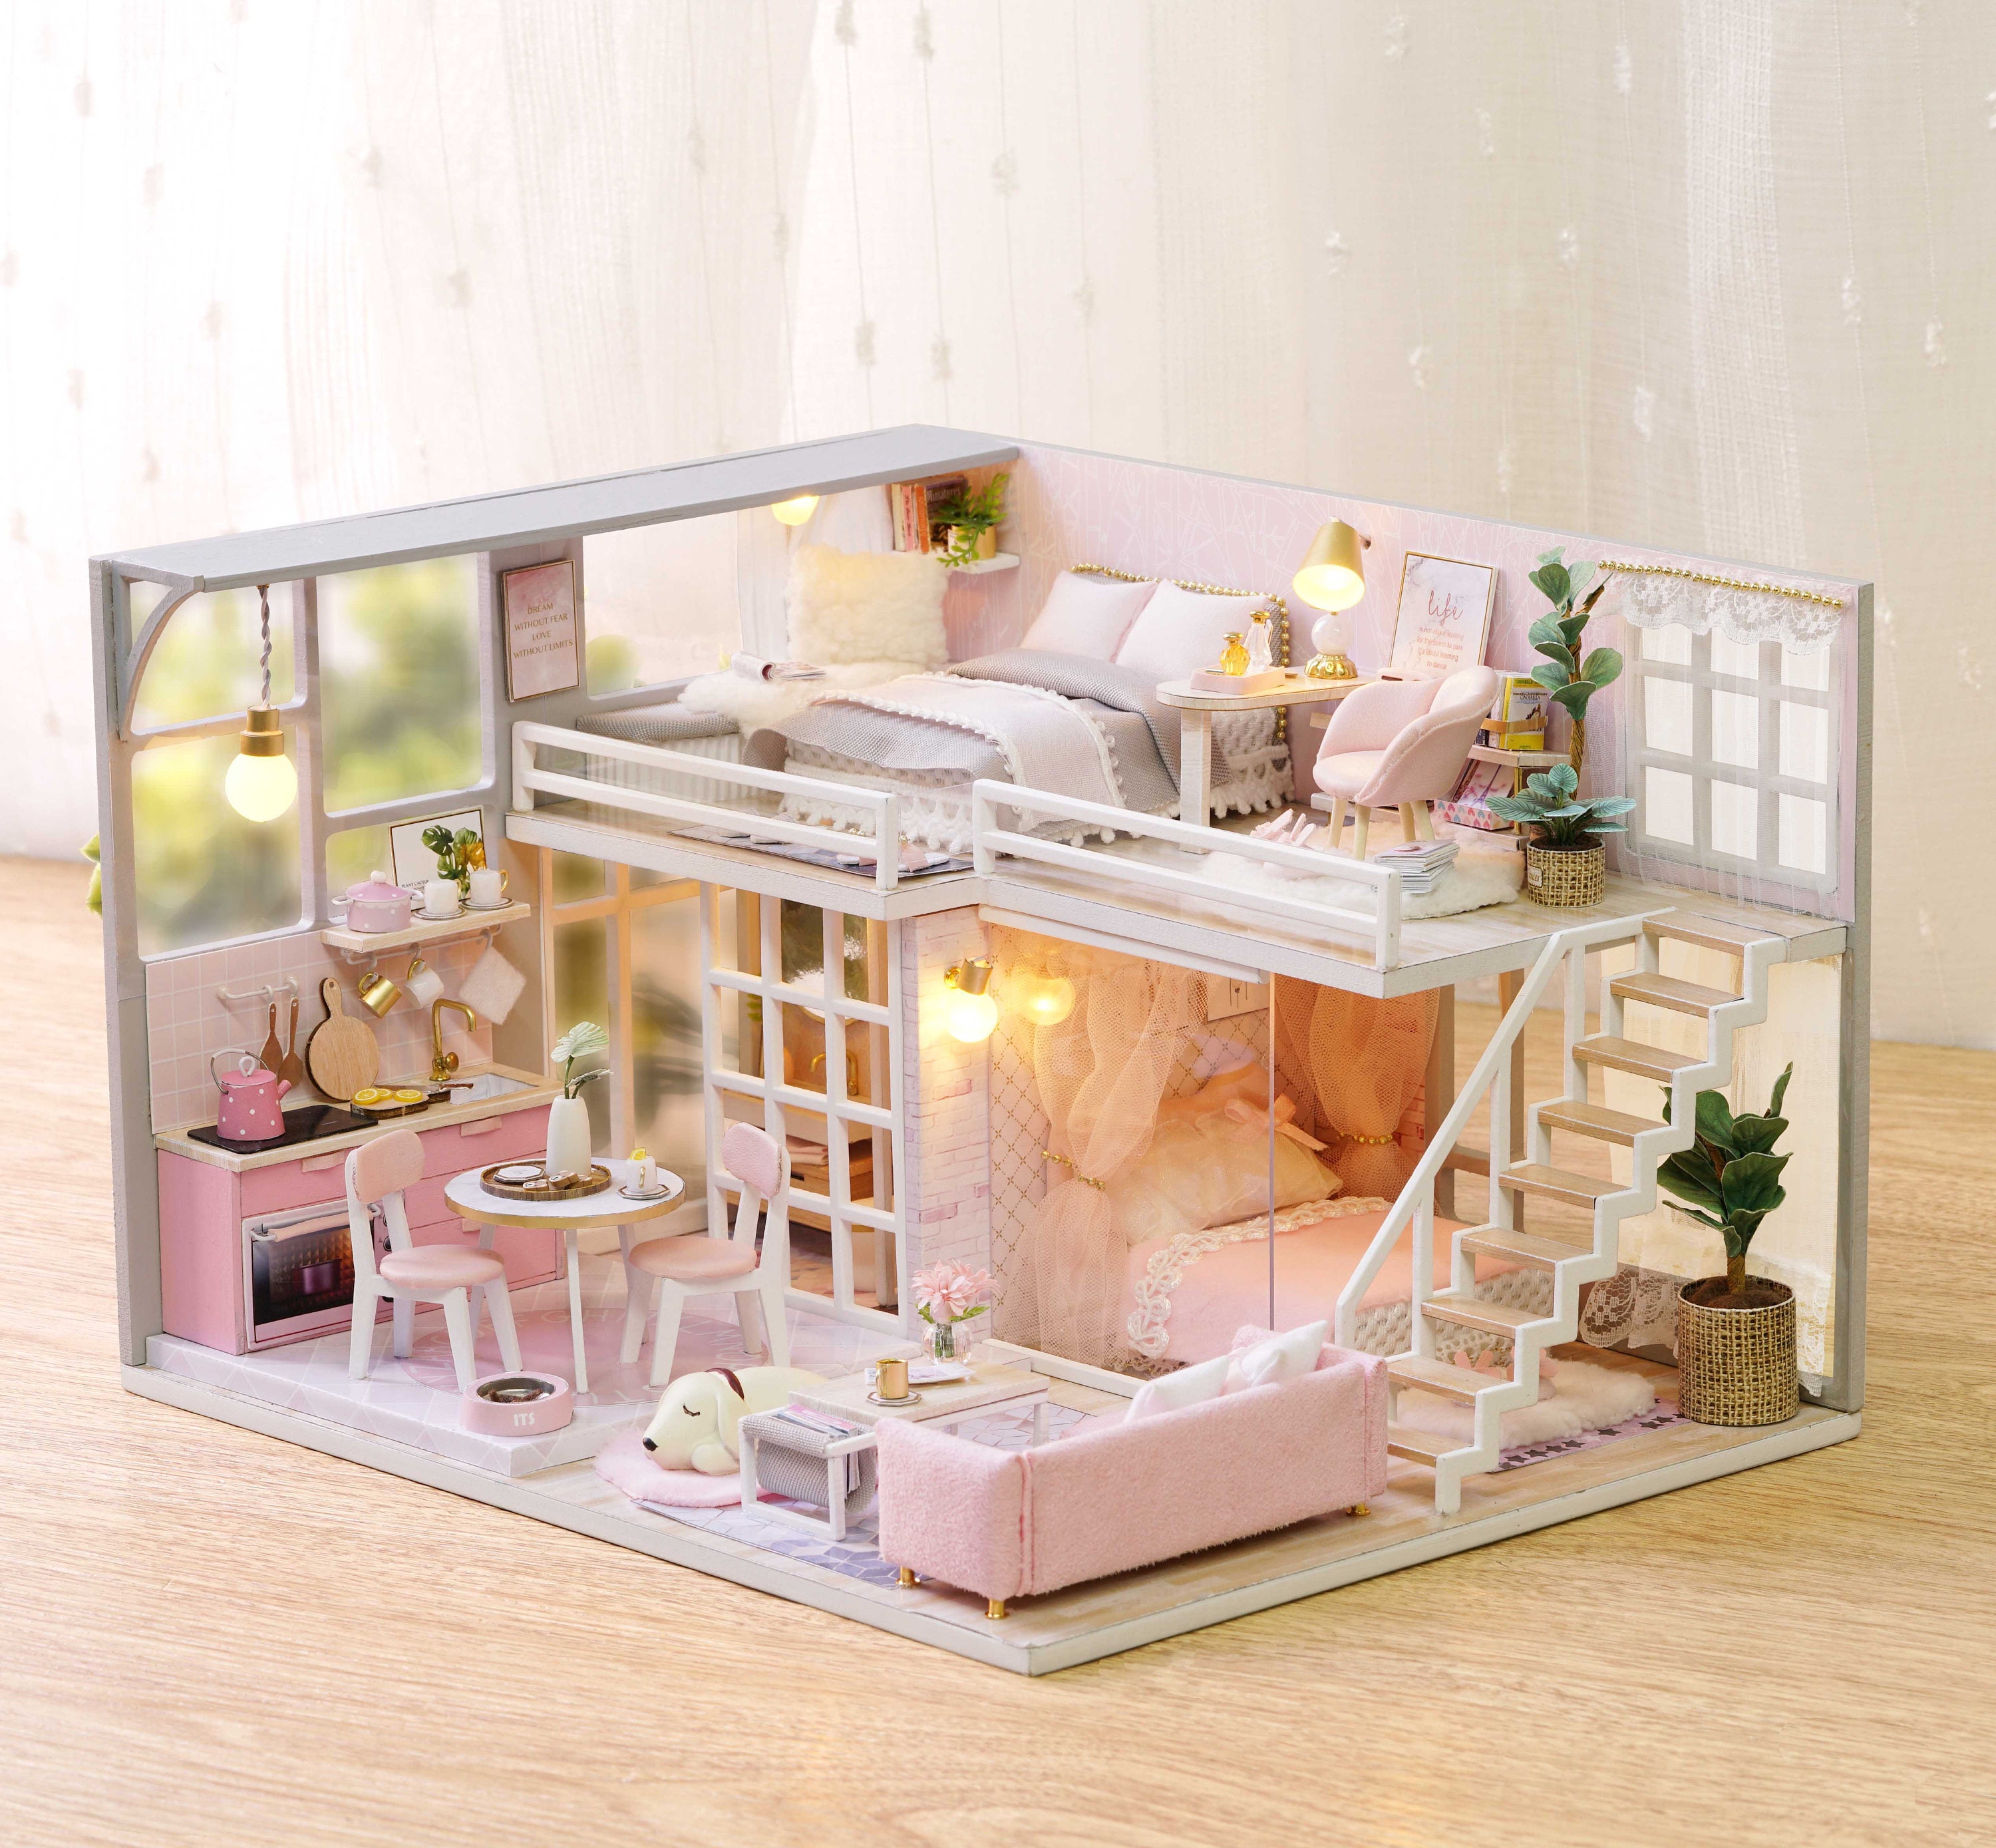 1: 24 DIY Miniature Dollhouse Kit Scenery Girlish Dream Loft Apartment  Craft in a Box Pink House With Light Music Box Adult Craft Gift Decor -   Denmark